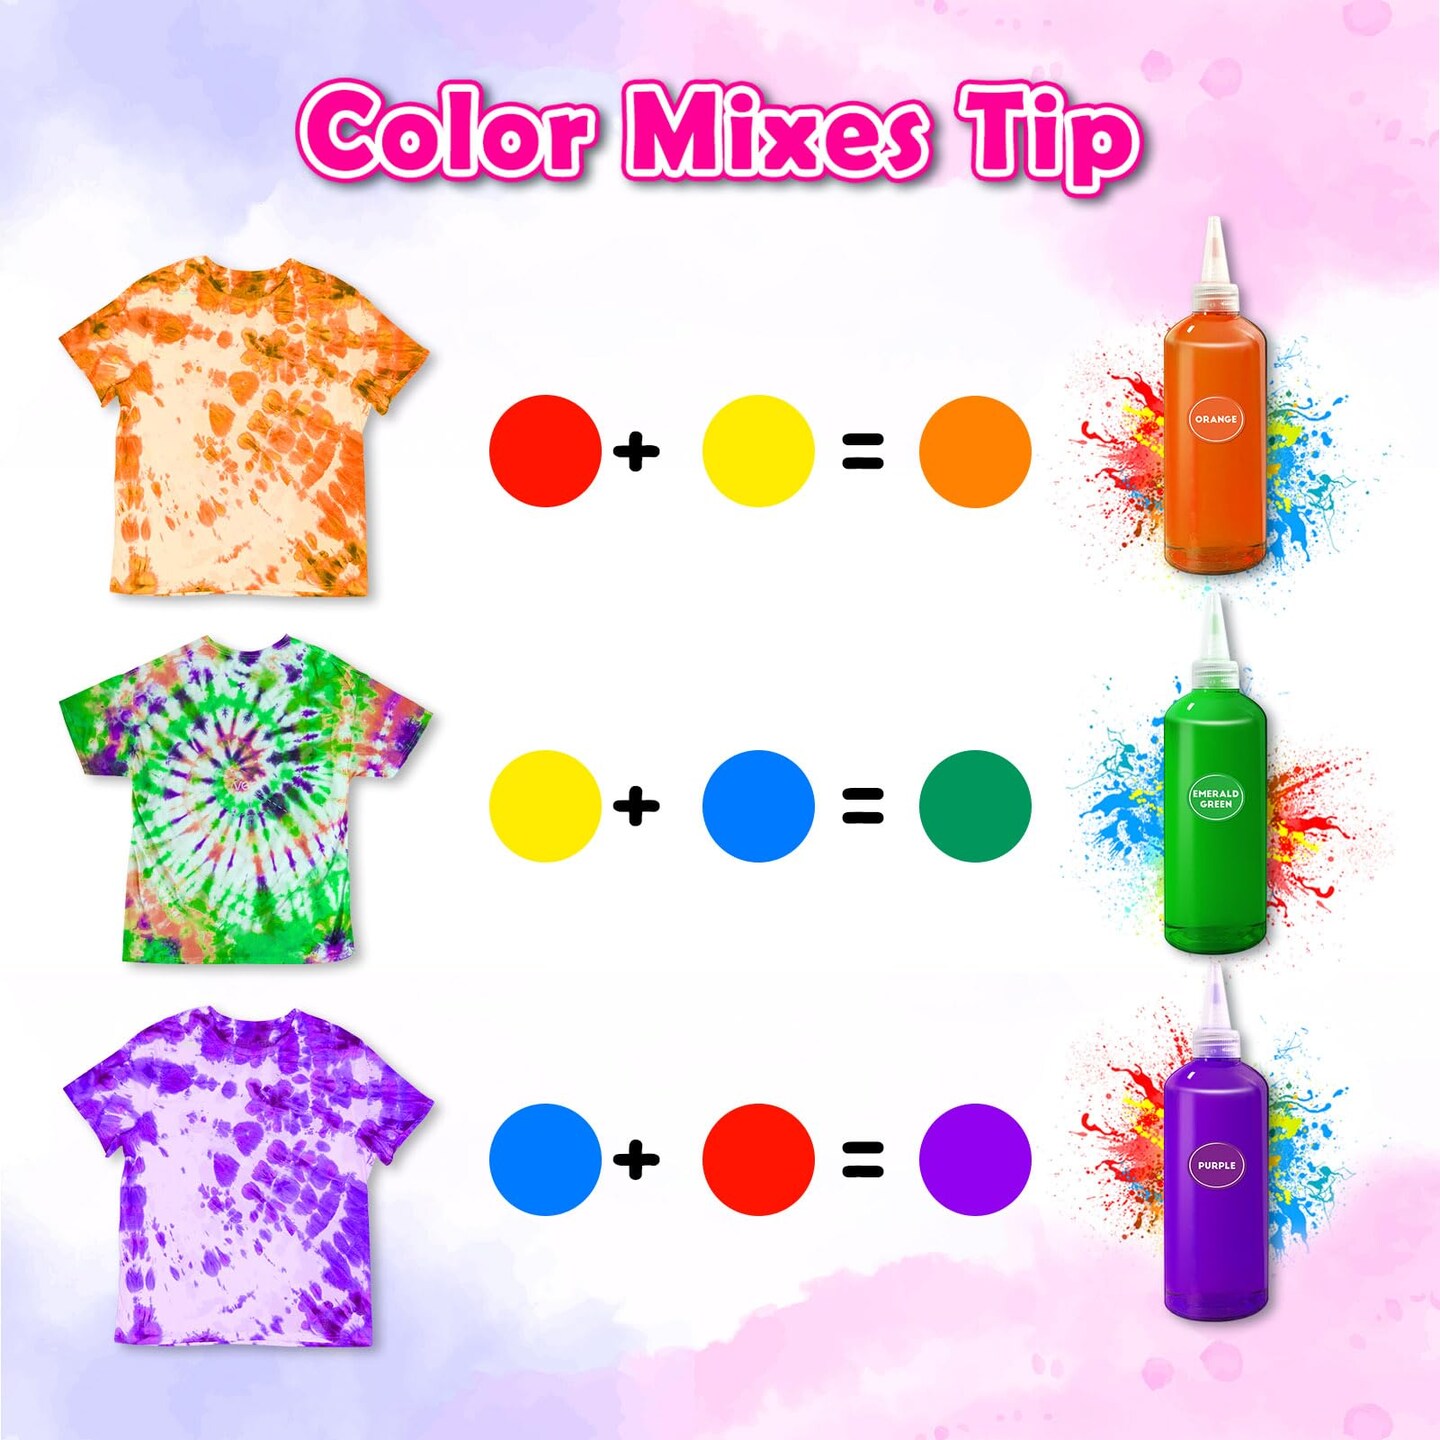 PATIFEED Tie Dye Kit 14 Colors Tie Dye Kit for Large Groups, Christmas Colors Tie Dye for Kids, Non Toxic Permanent Fabric Dye Summer Activities for Kids, Adults, Large Groups, Handmade Party